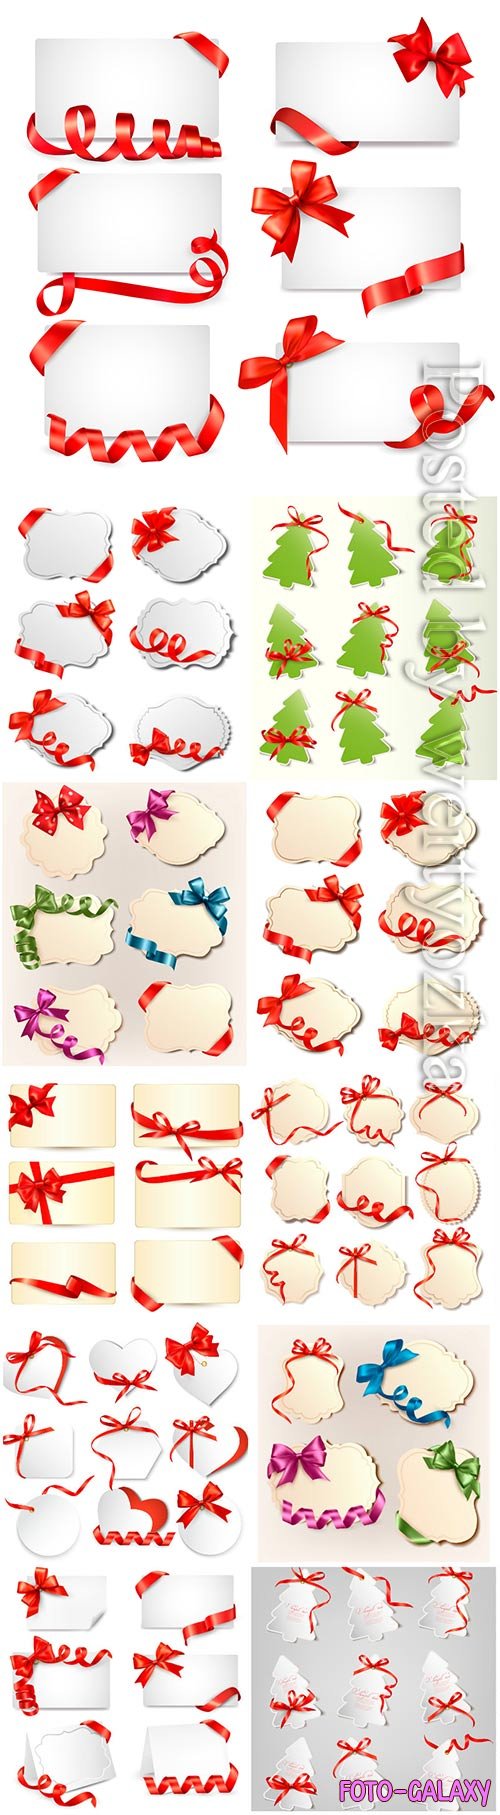 Set of gift vector cards with colorful gift bows with ribbons